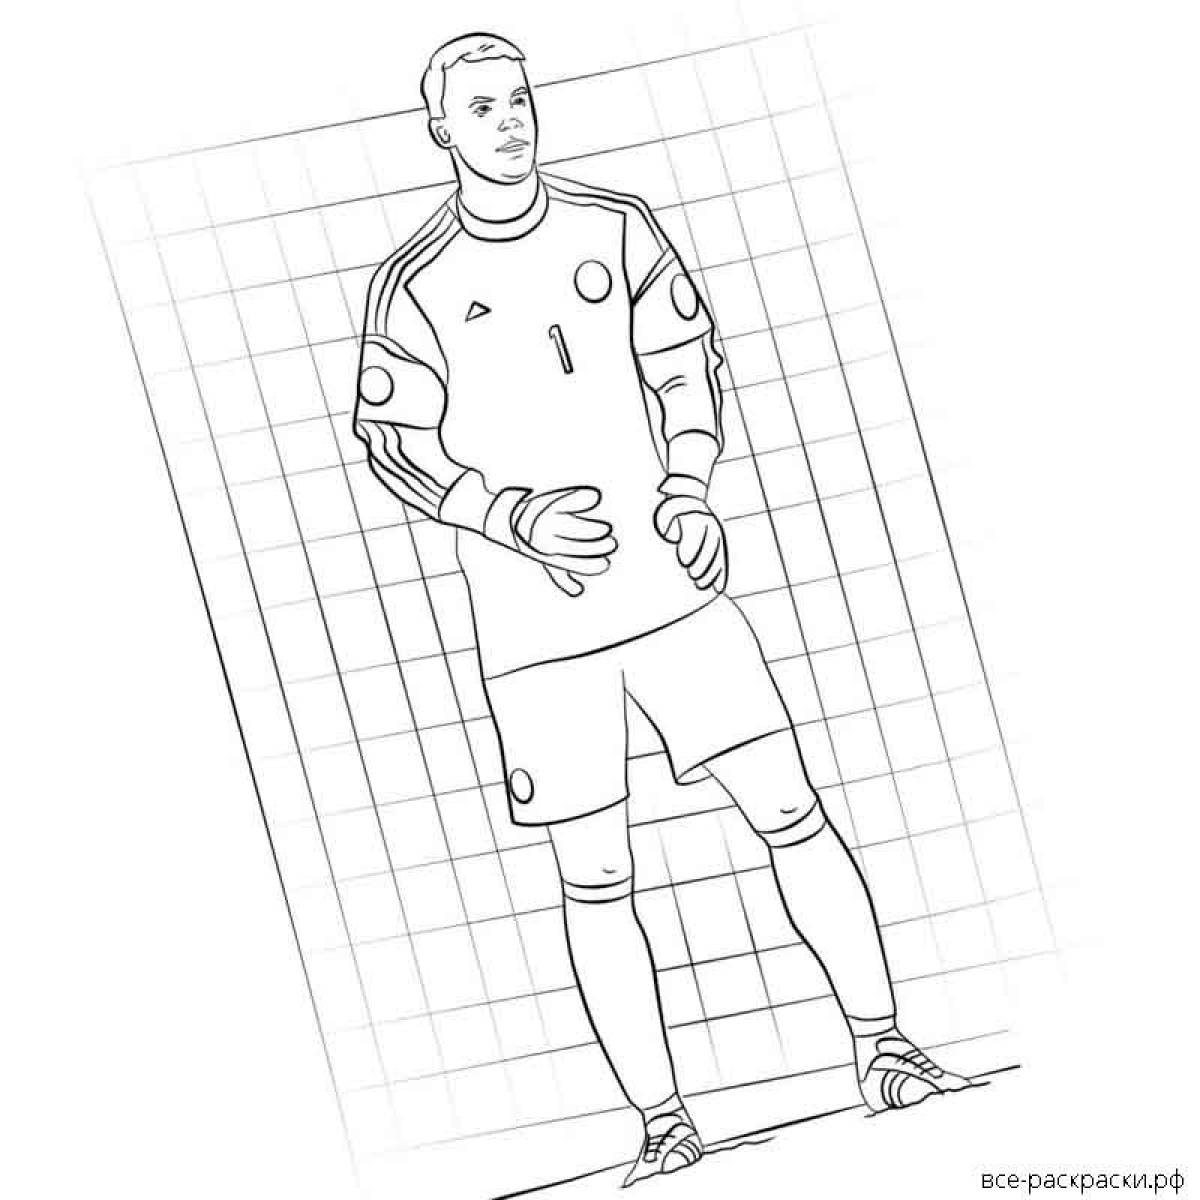 Exquisite mbappe coloring book